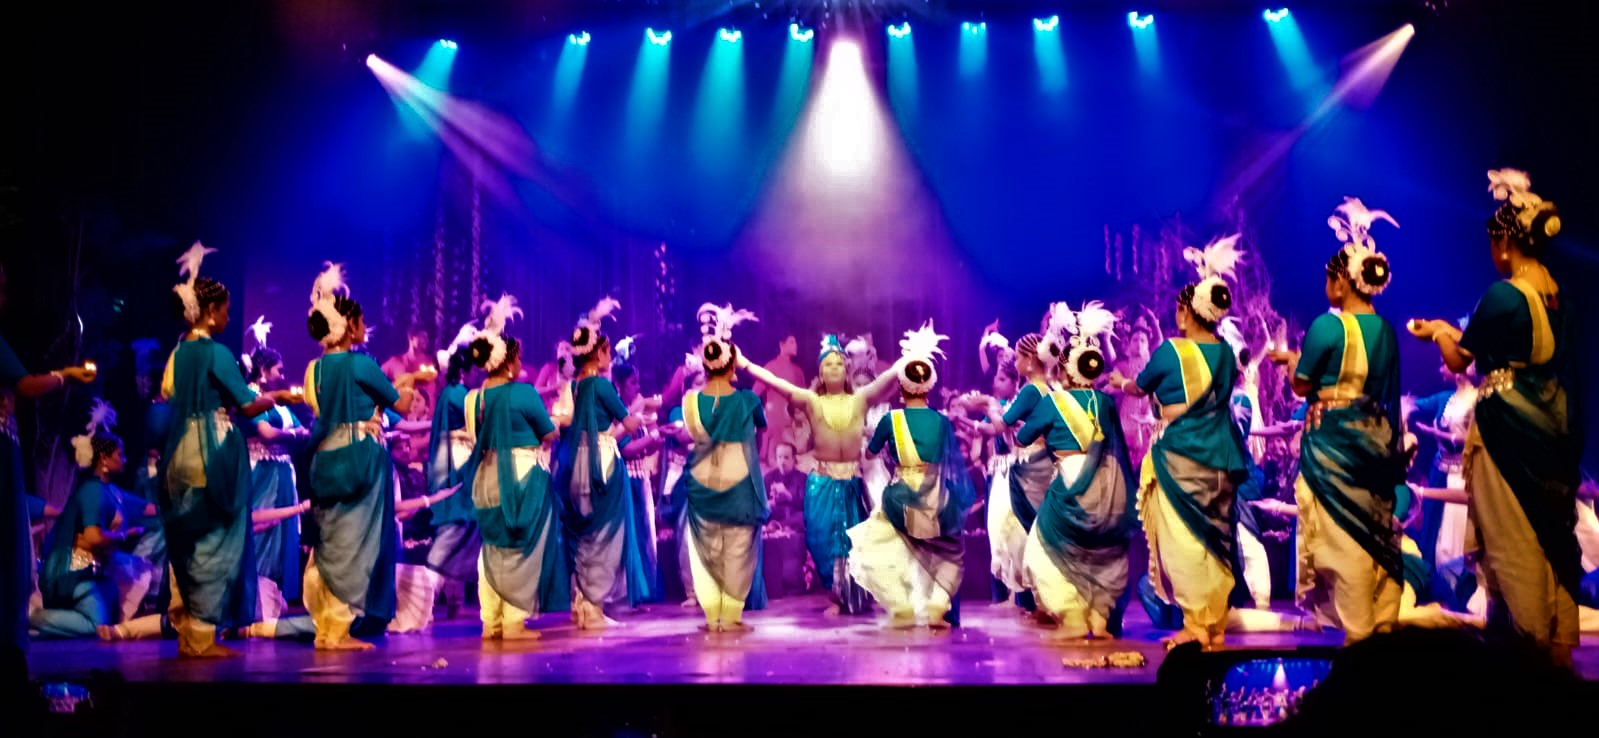 Costume to music, music to lighting, and the audience all contributed to the Dakshinayan UK in association with Dikshamanjari Kolkata organized a grand dance drama on Tagore's "MAYAR KHELA" Featuring DONA GANGULY, RAGHUNATH DAS. 